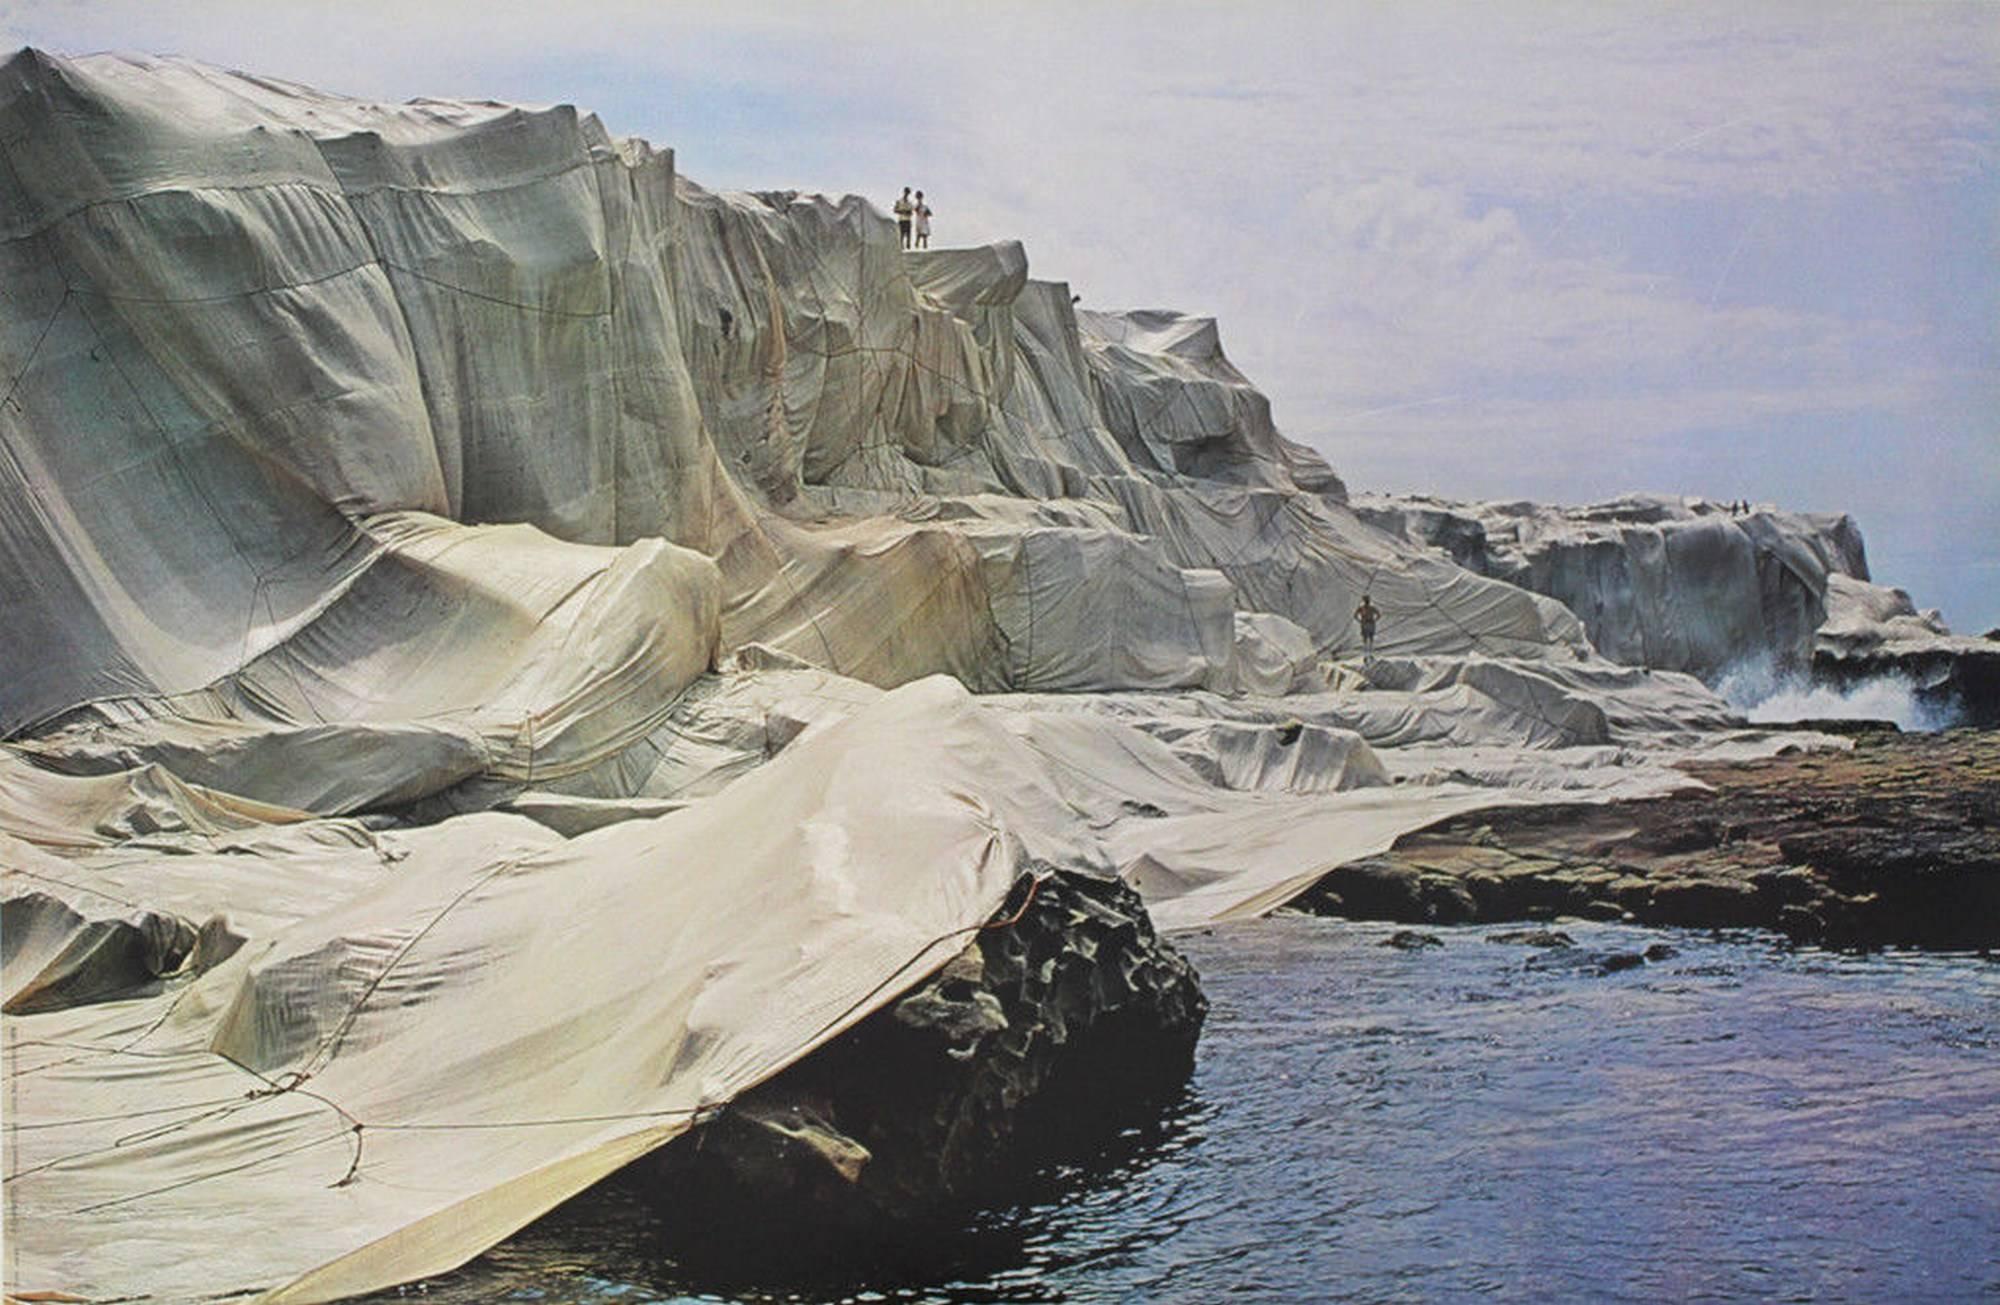 Wrapped Coast, Little Bay, Australia, 1969 - Print by Christo and Jeanne-Claude